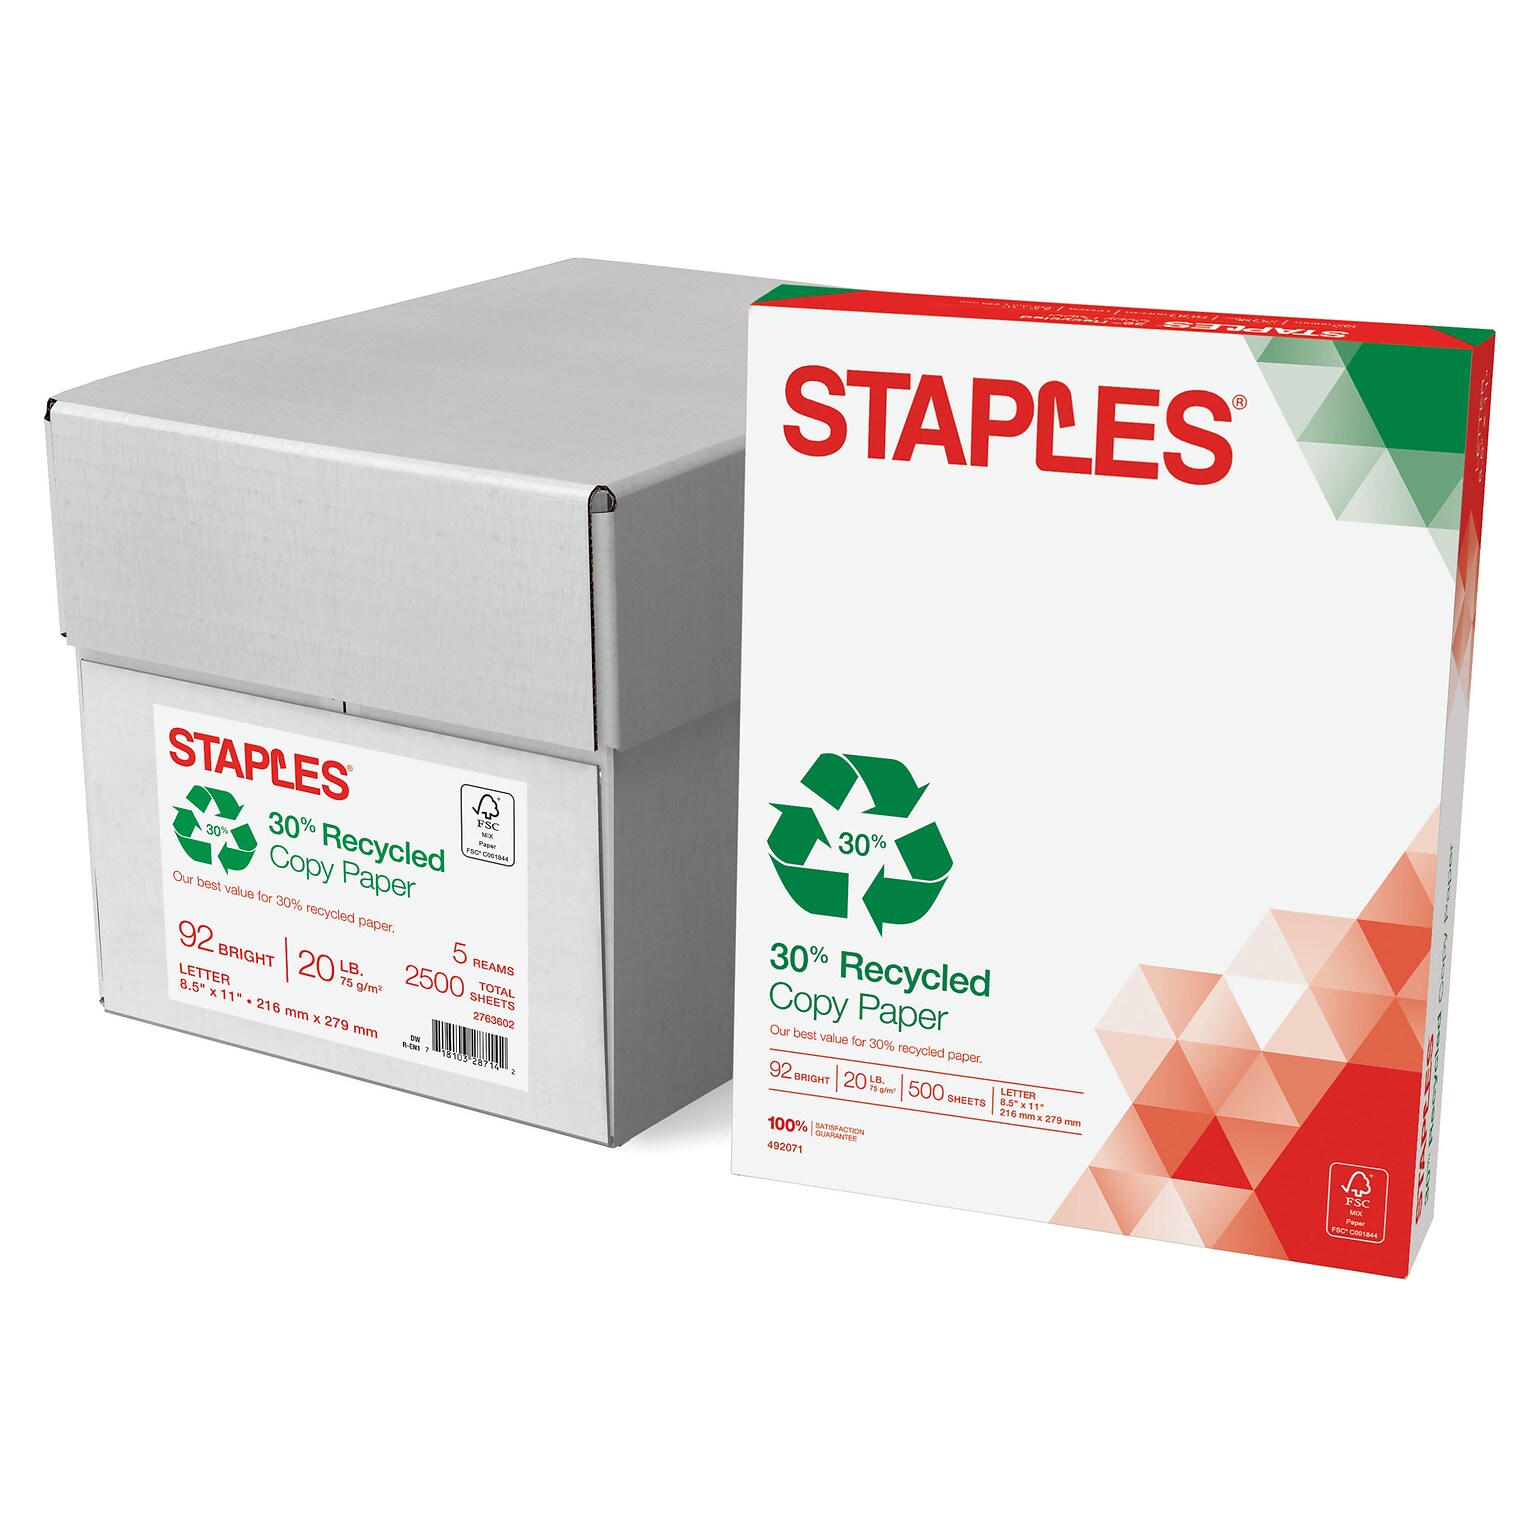 Staples 30% Recycled 8.5 x 11 Copy Paper, 20 lbs., 92 Brightness, 500 Sheets/Ream, 5 Reams/Carton (51959-US)